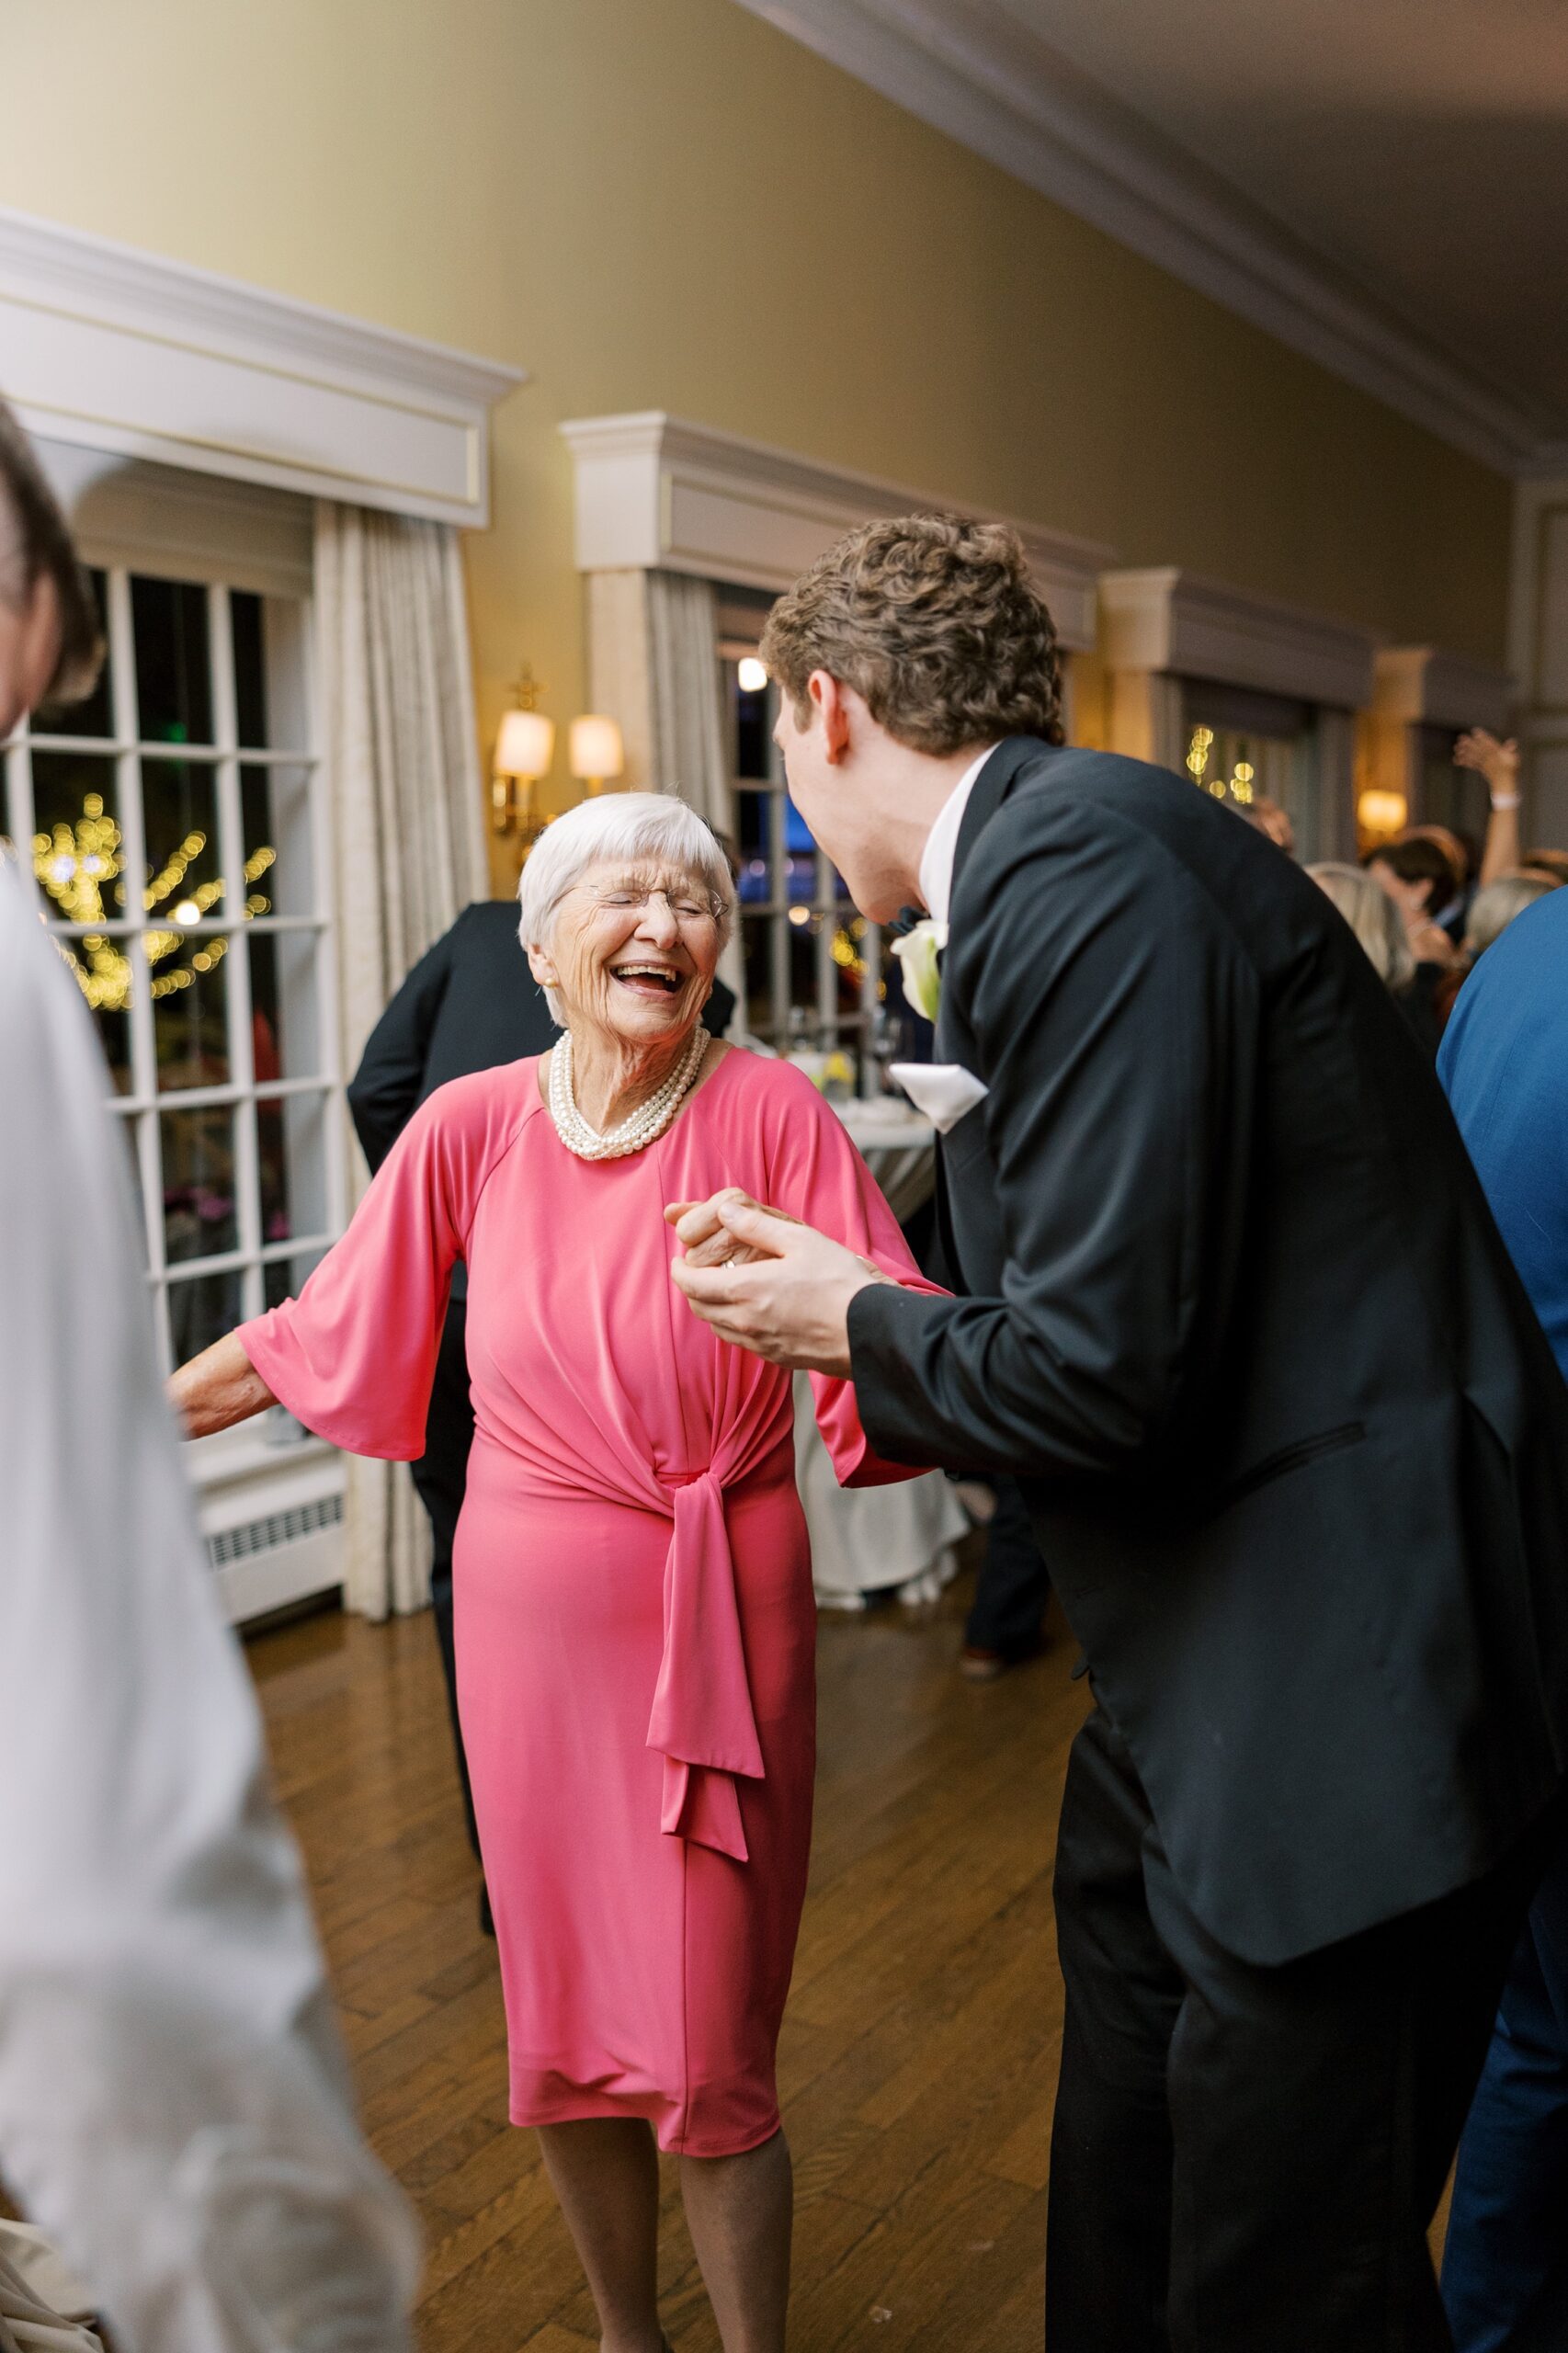 Guests enjoyed the reception at the Westmoreland Country Club wedding